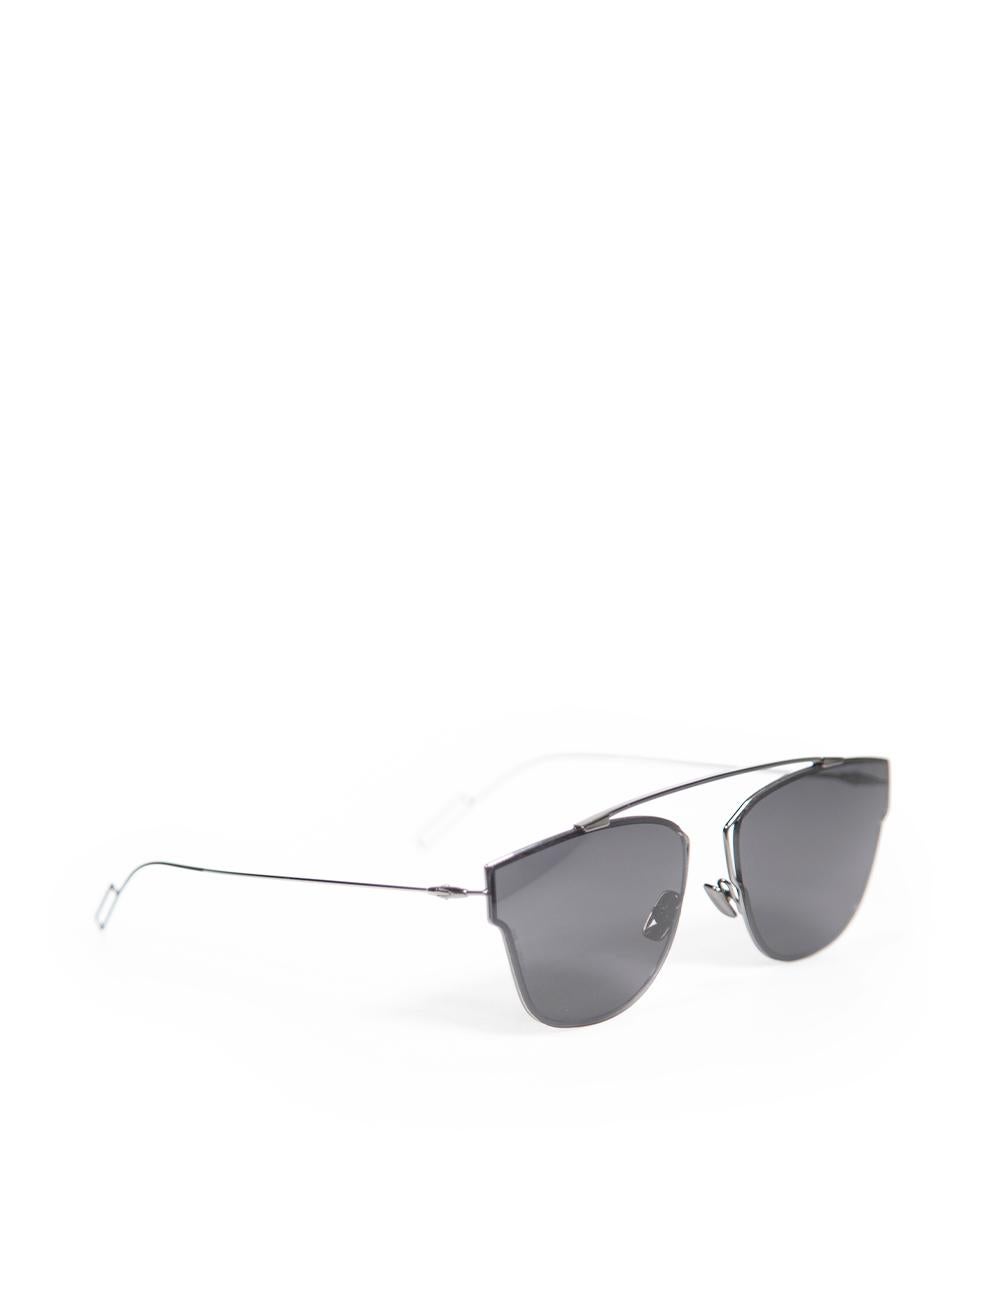 CONDITION is Very good. Hardly any visible wear to sunglasses is evident on this used Dior designer resale item. These sunglasses come with original case and dust cloth.
 
 
 
 Details
 
 
 DIOR0204S model
 
 Black
 
 Metal
 
 Aviator sunglasses
 
